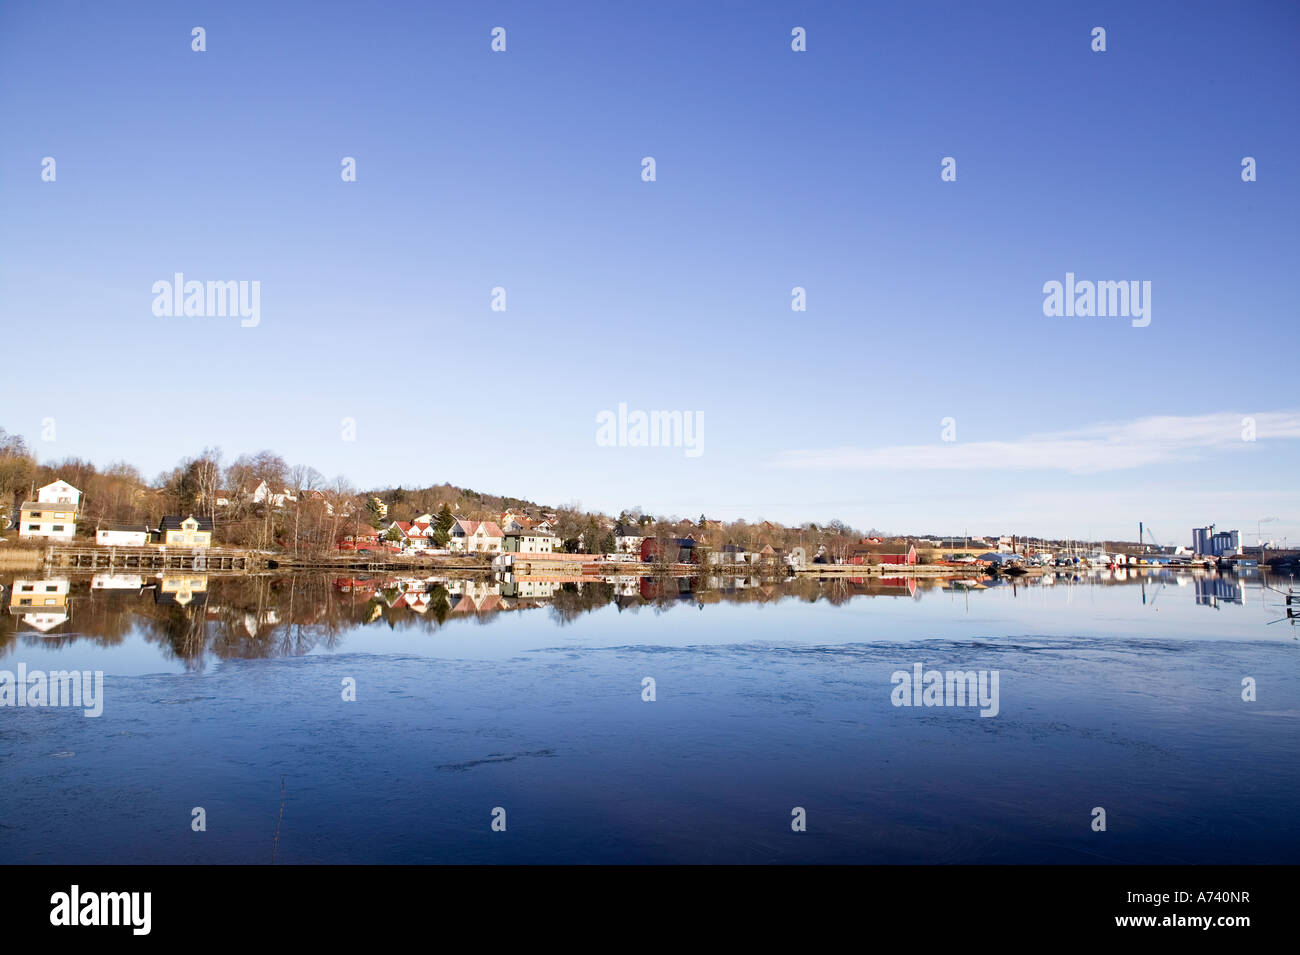 Residential area on the glomma river in south eastern Norway Stock Photo